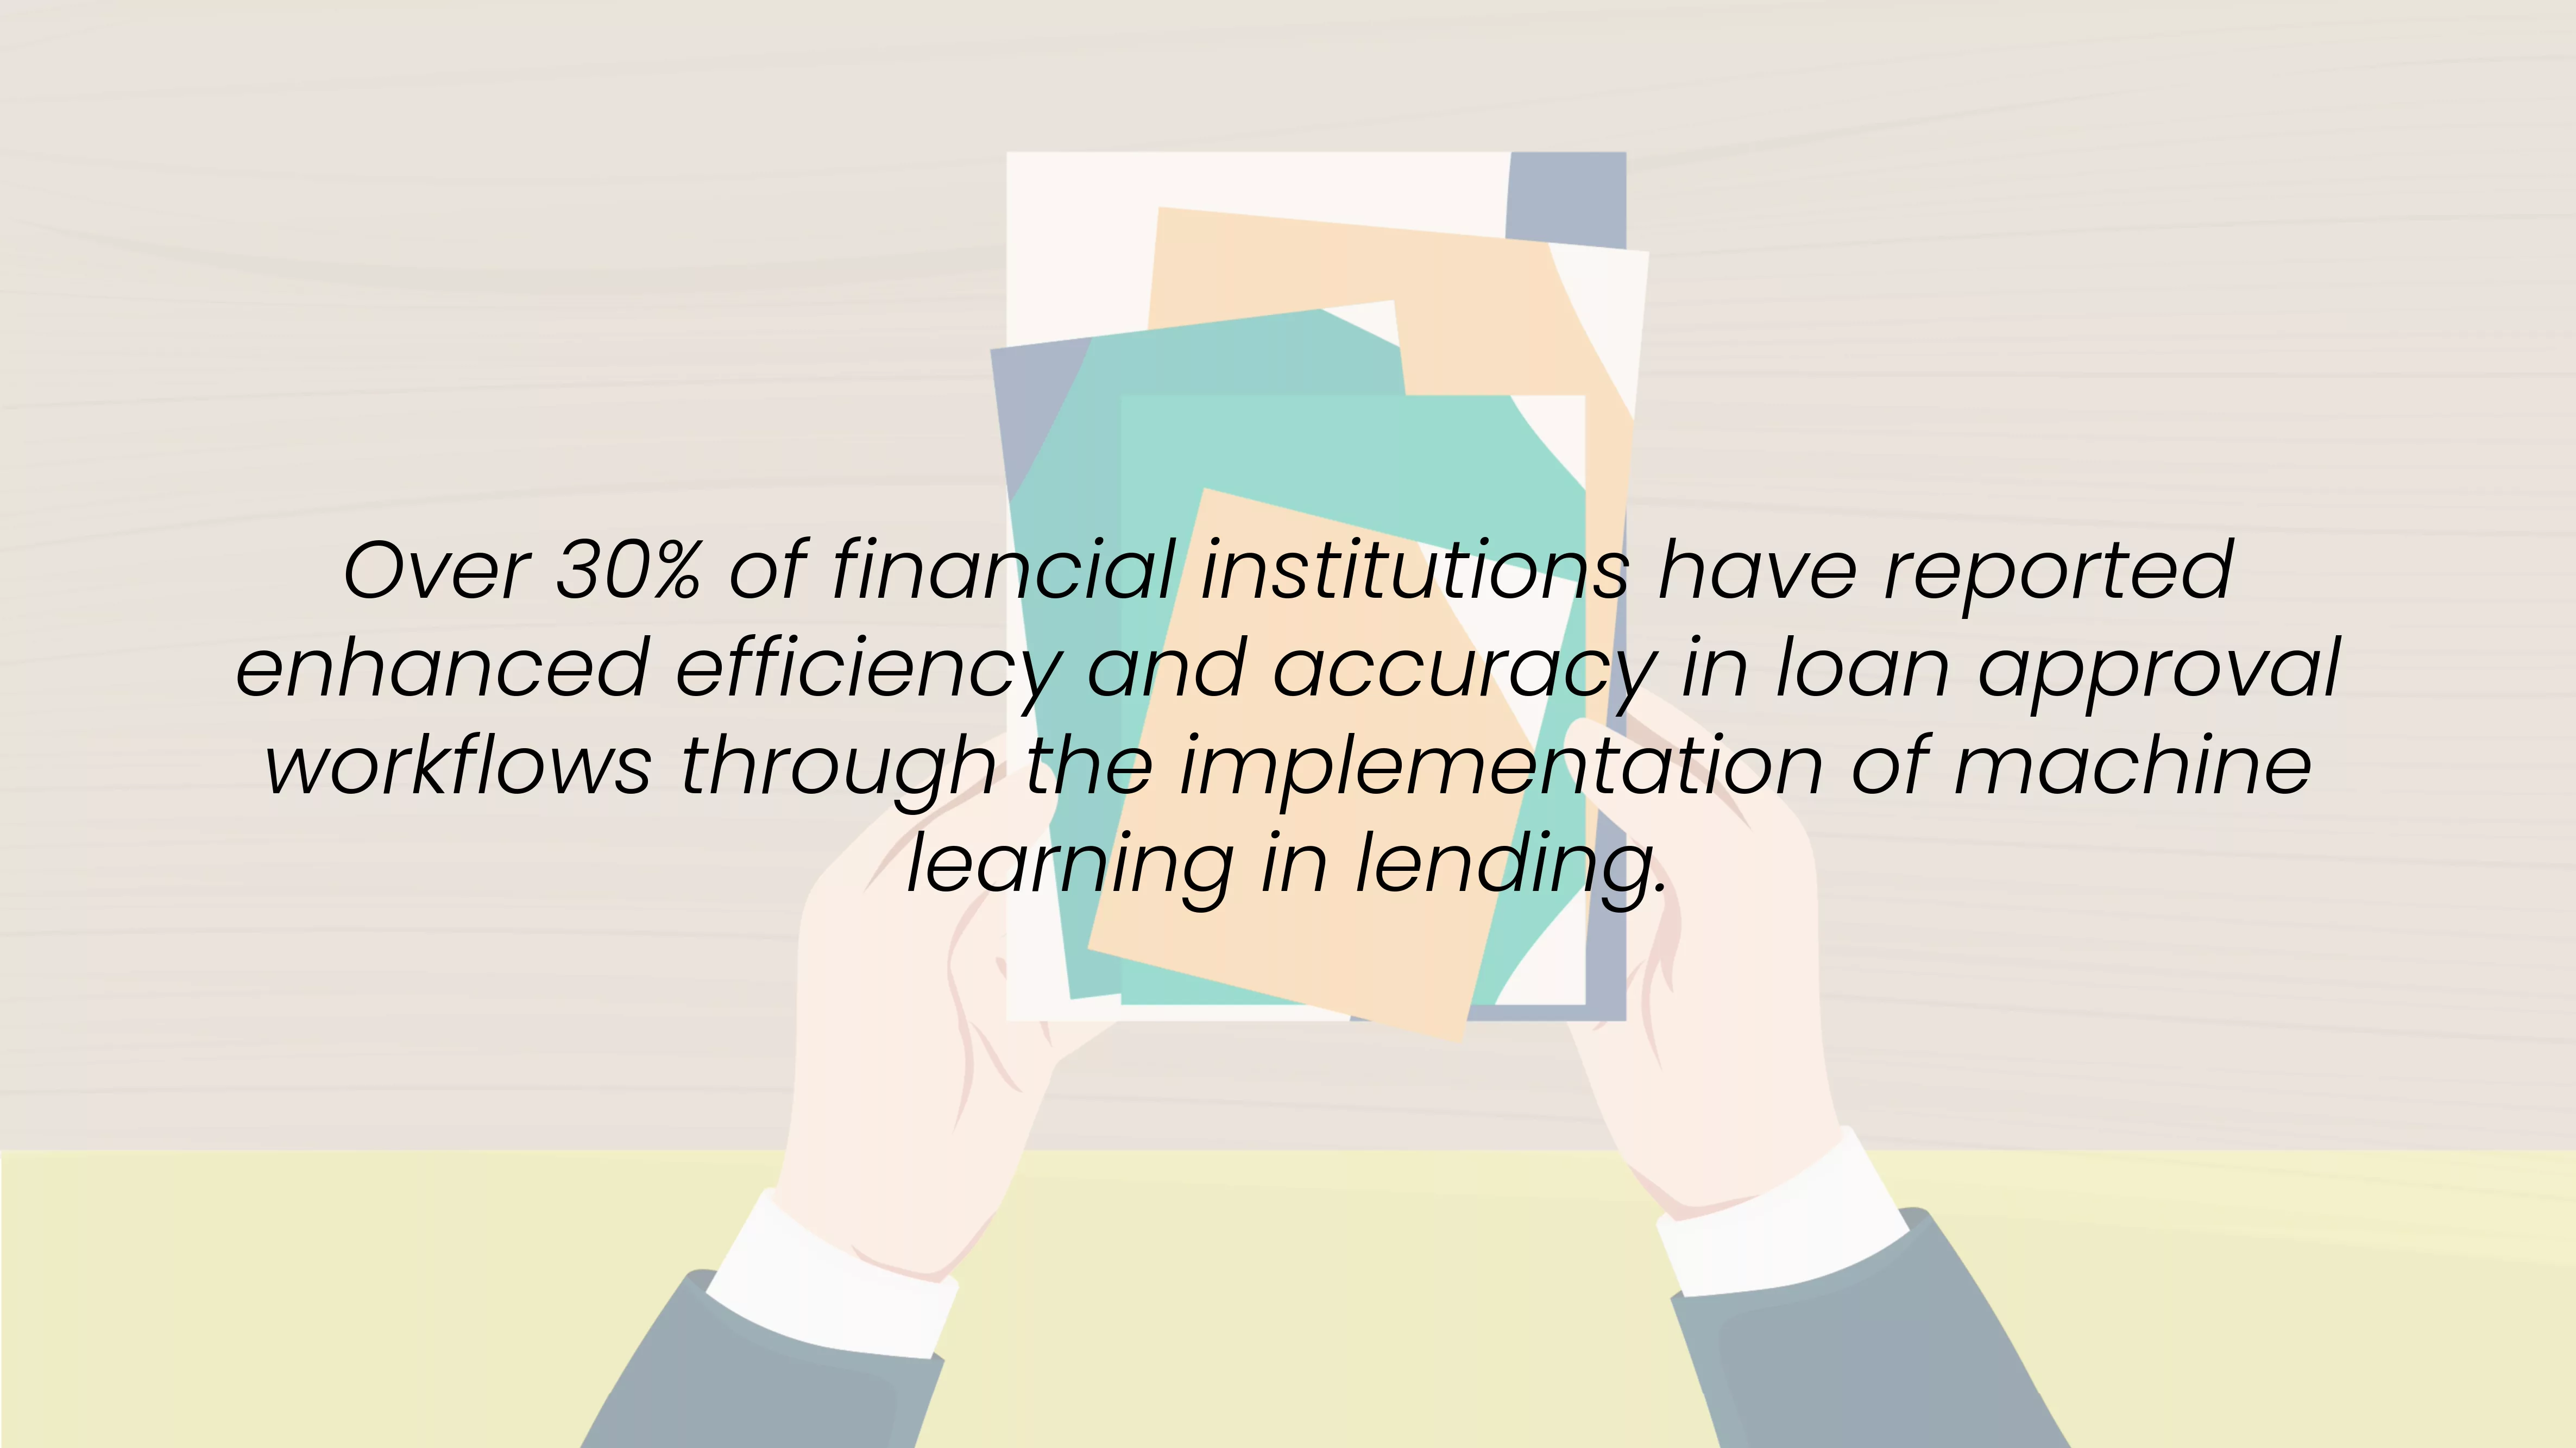 Over 30% of financial institutions have reported enhanced efficiency and accuracy in loan approval workflows through the implementation of machine learning in digital loan origination system.